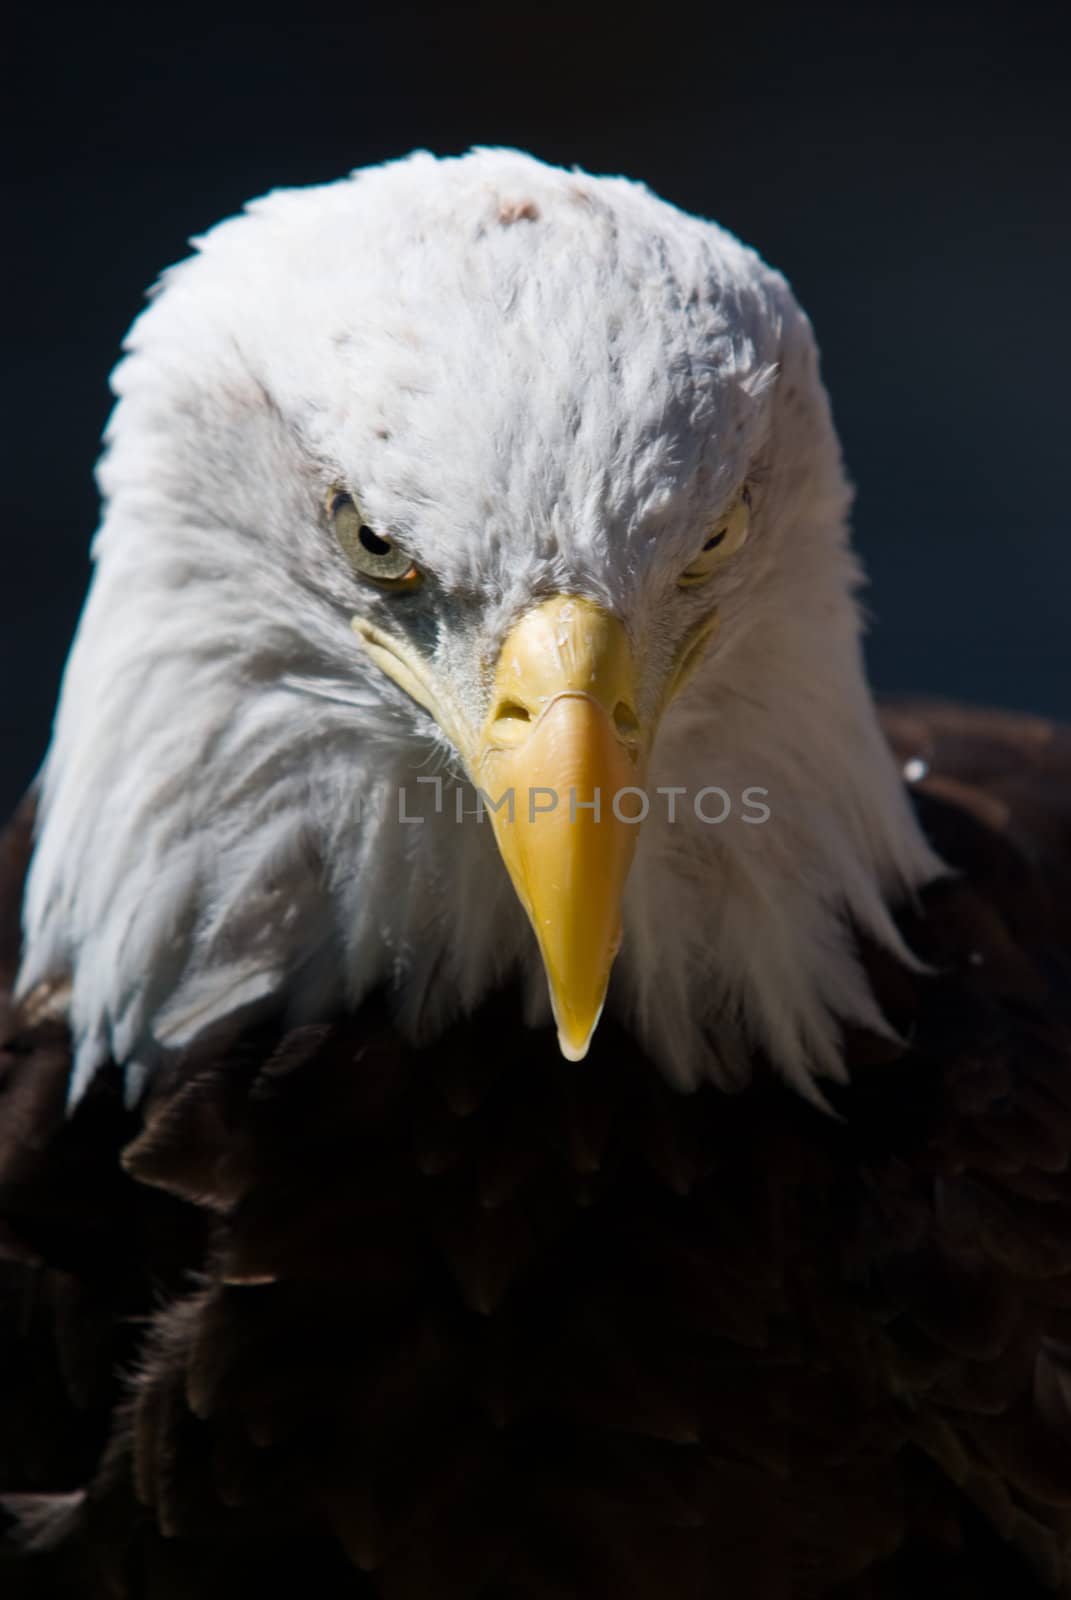 A Bald Eagle looking at you on a dark background